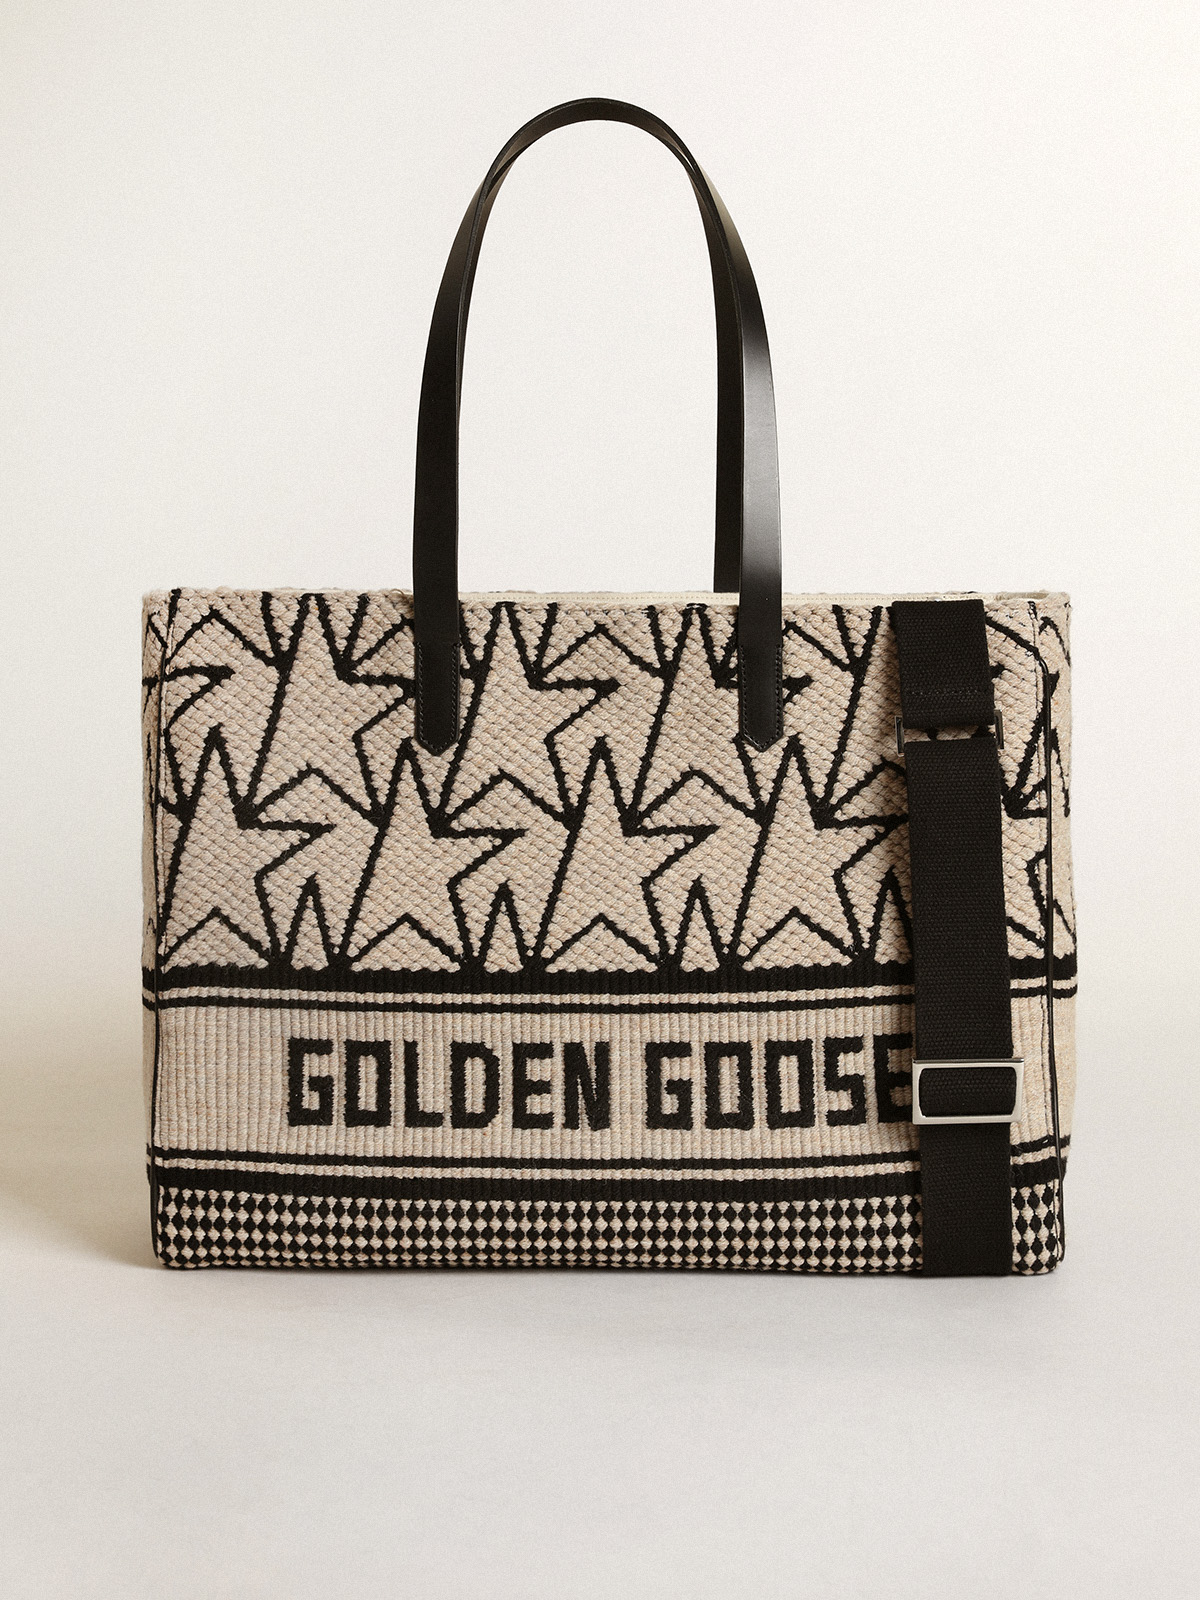 French Connection classic tote bag in black